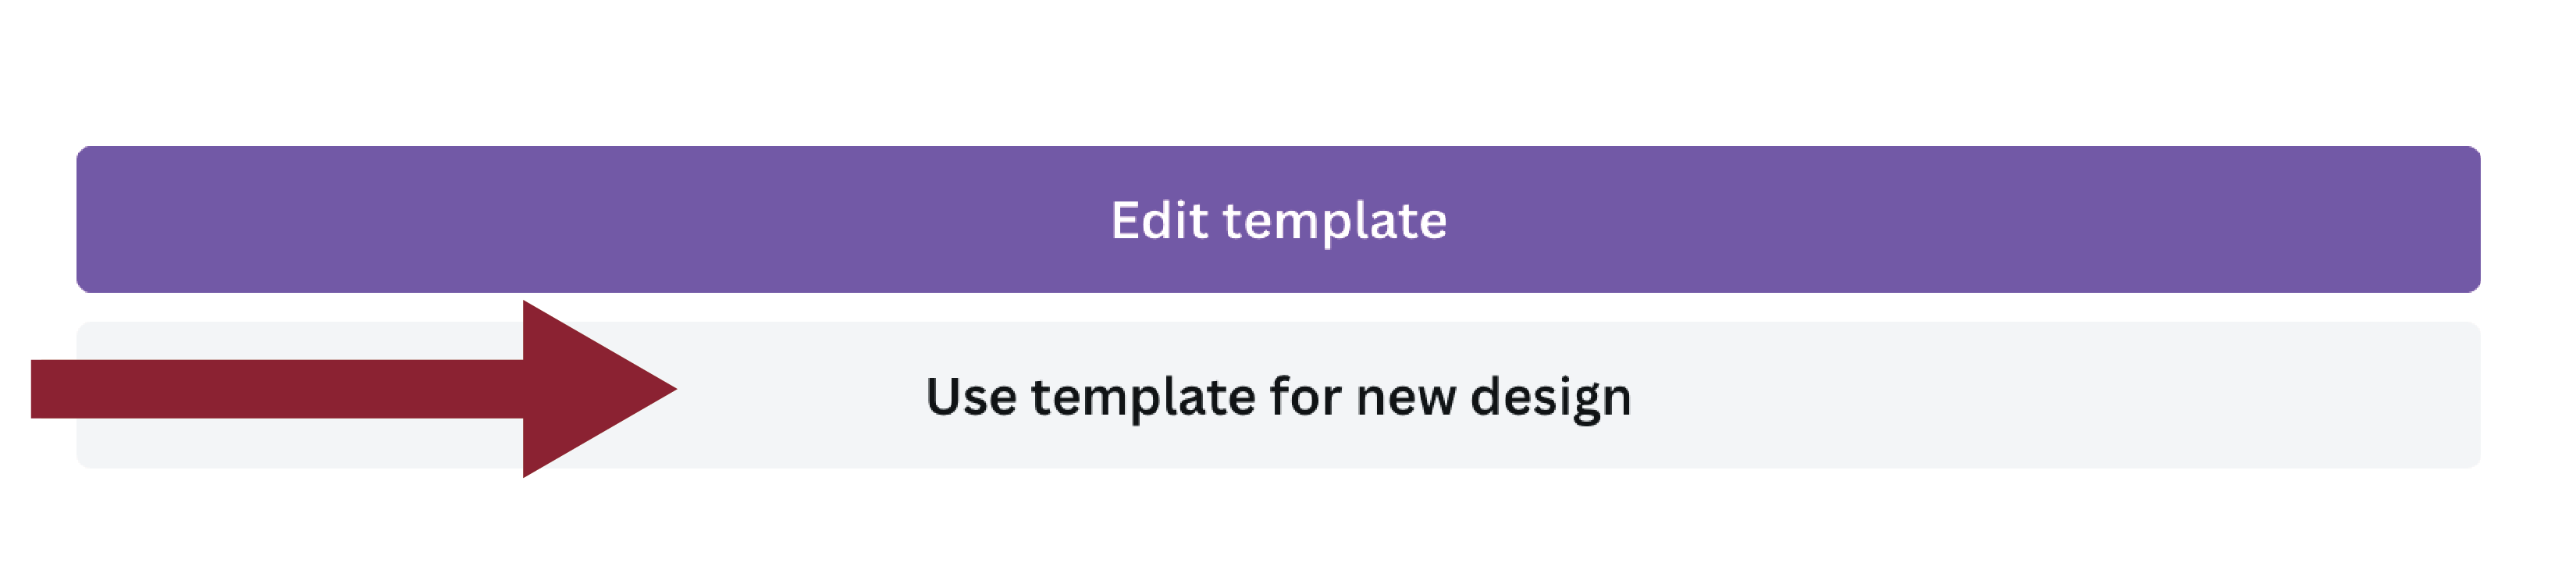 Canva Template Instructions